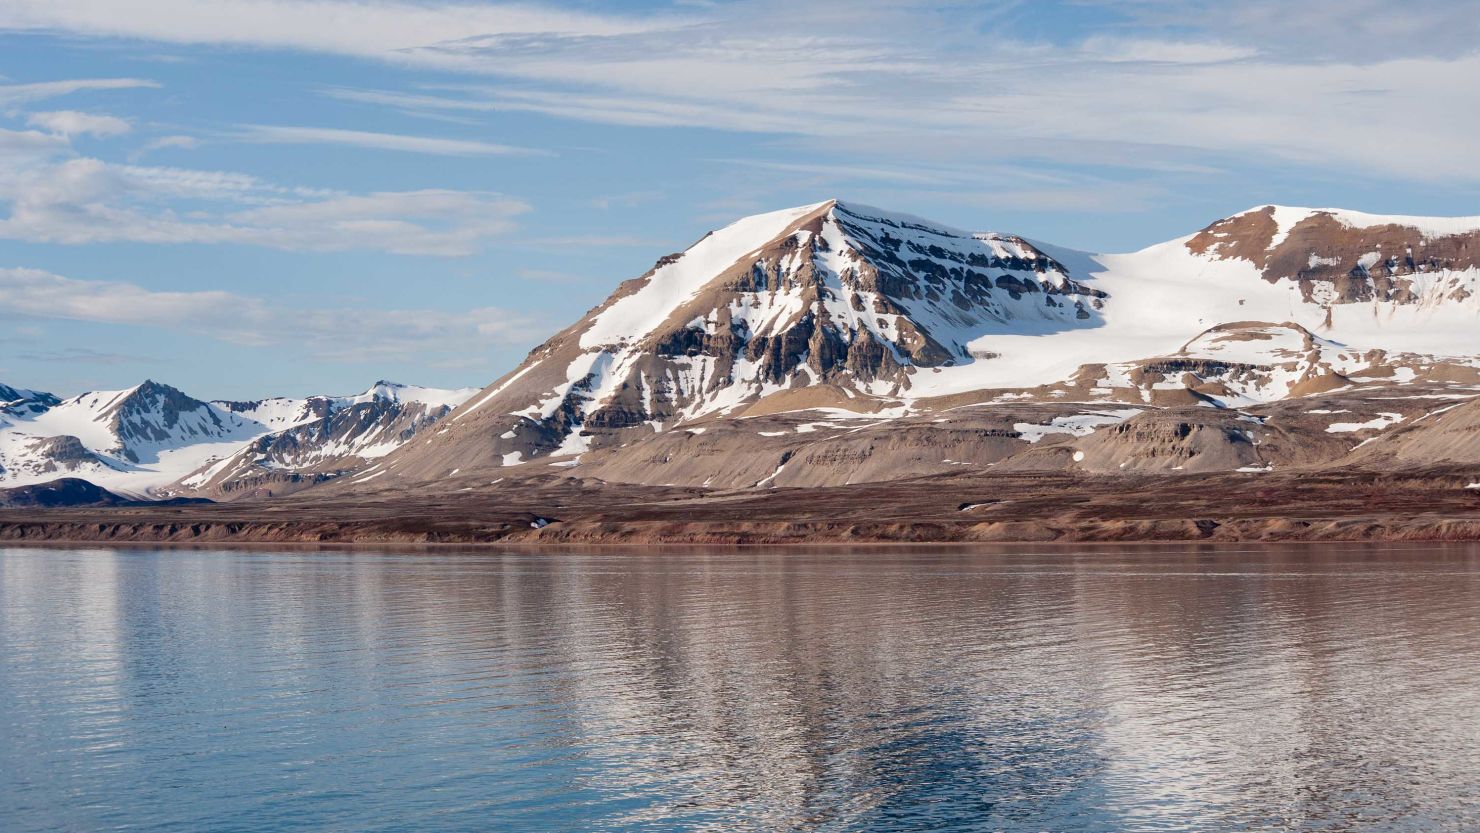 Eight soil samples were collected from the arctic region of Kongsfjorden.